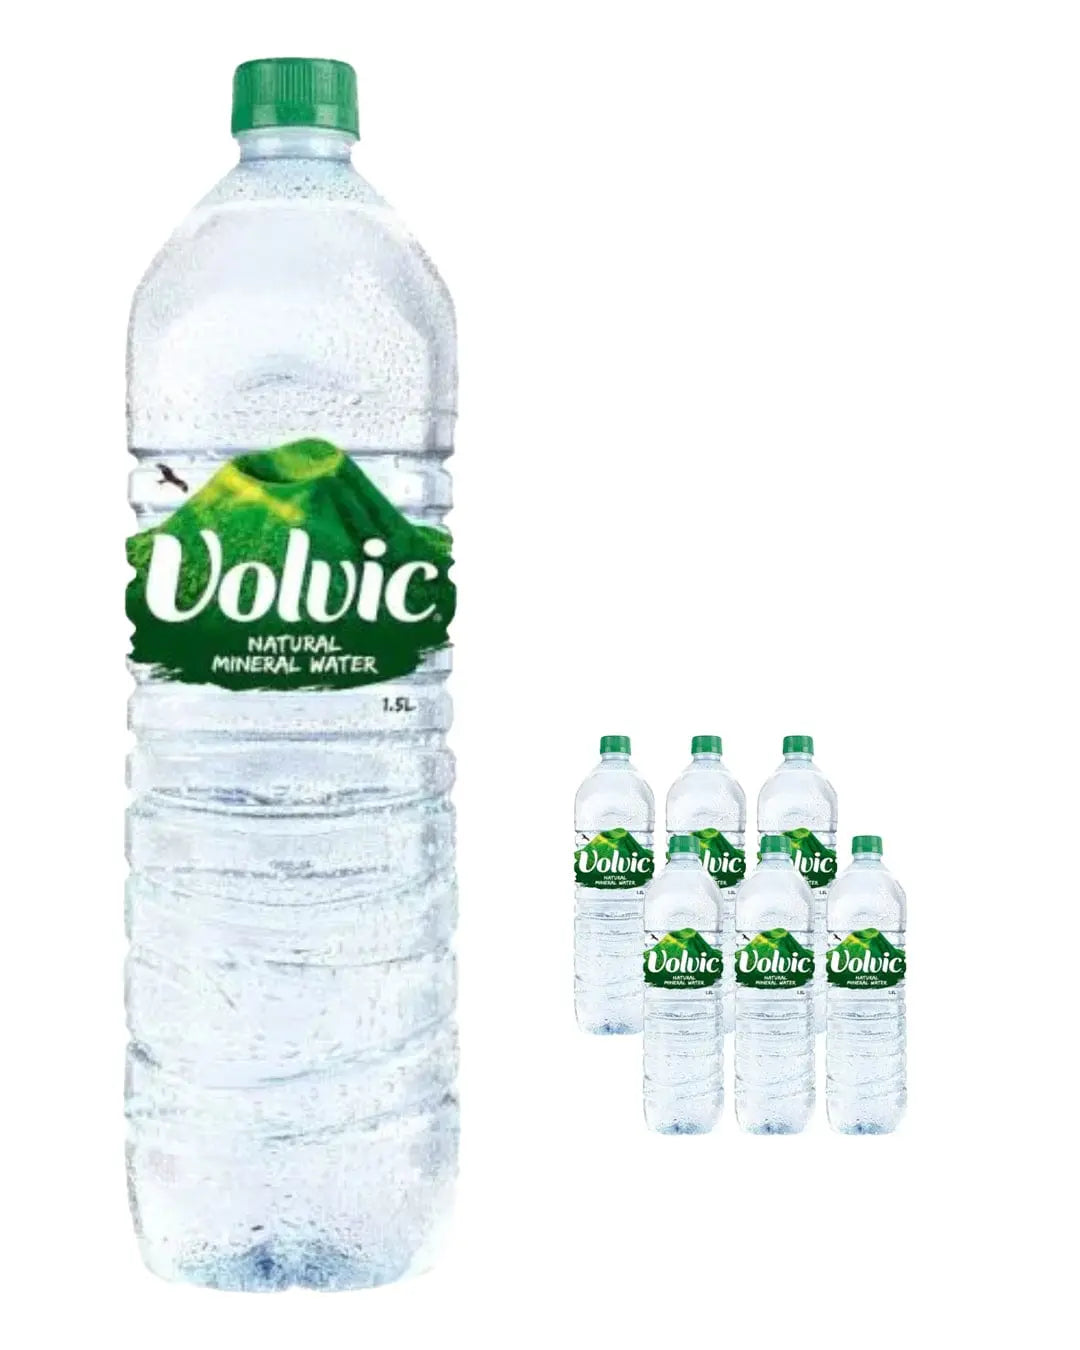 Volvic Still Mineral Water Multipack, 6 x 1.5 L – The Bottle Club